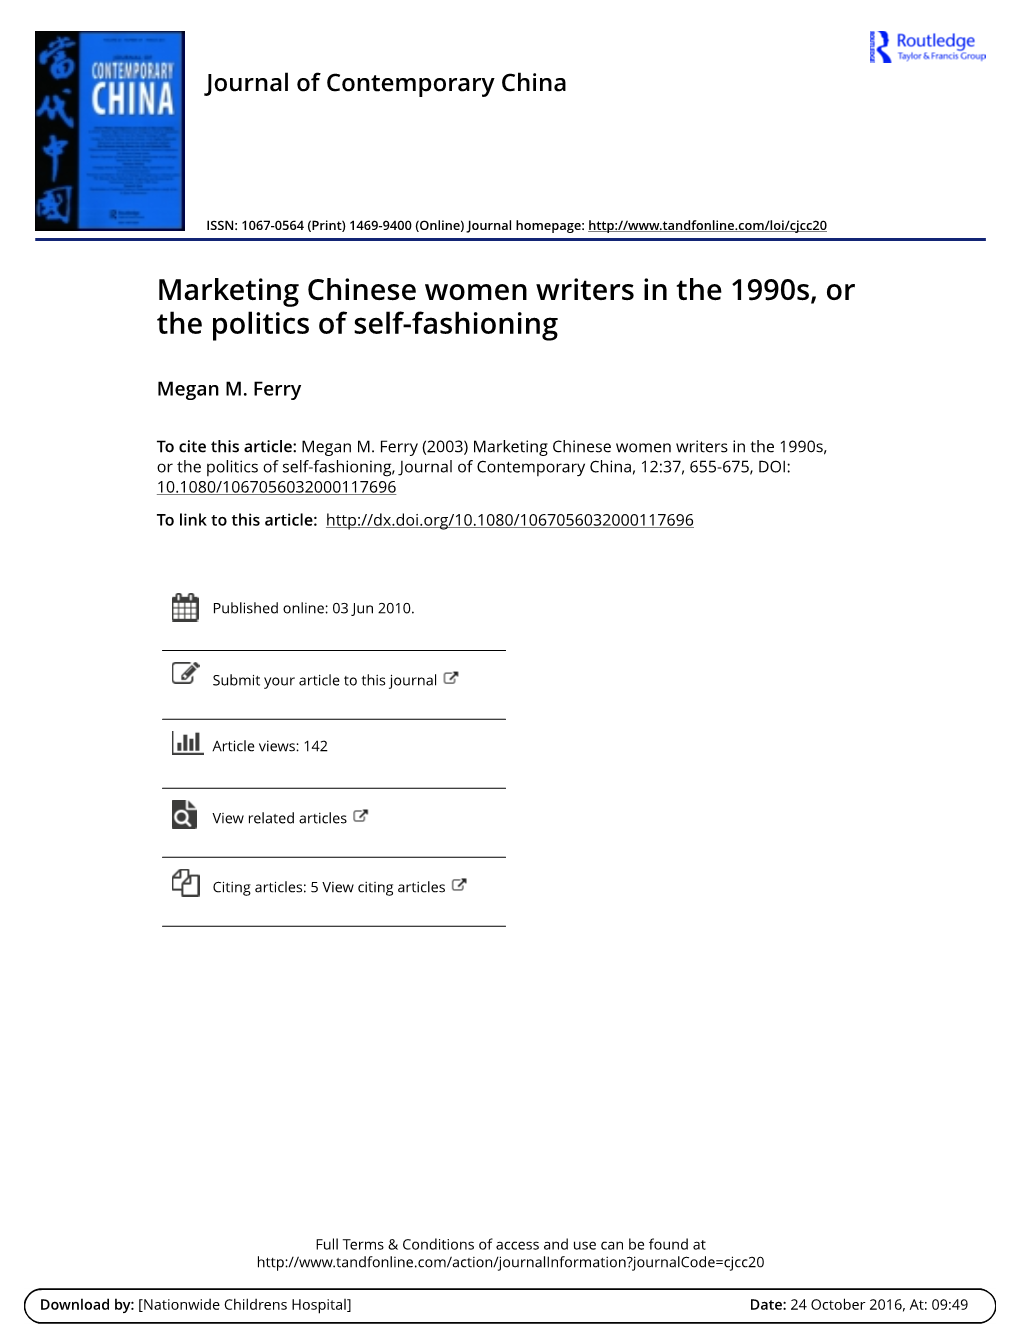 Marketing Chinese Women Writers in the 1990S, Or the Politics of Self-Fashioning